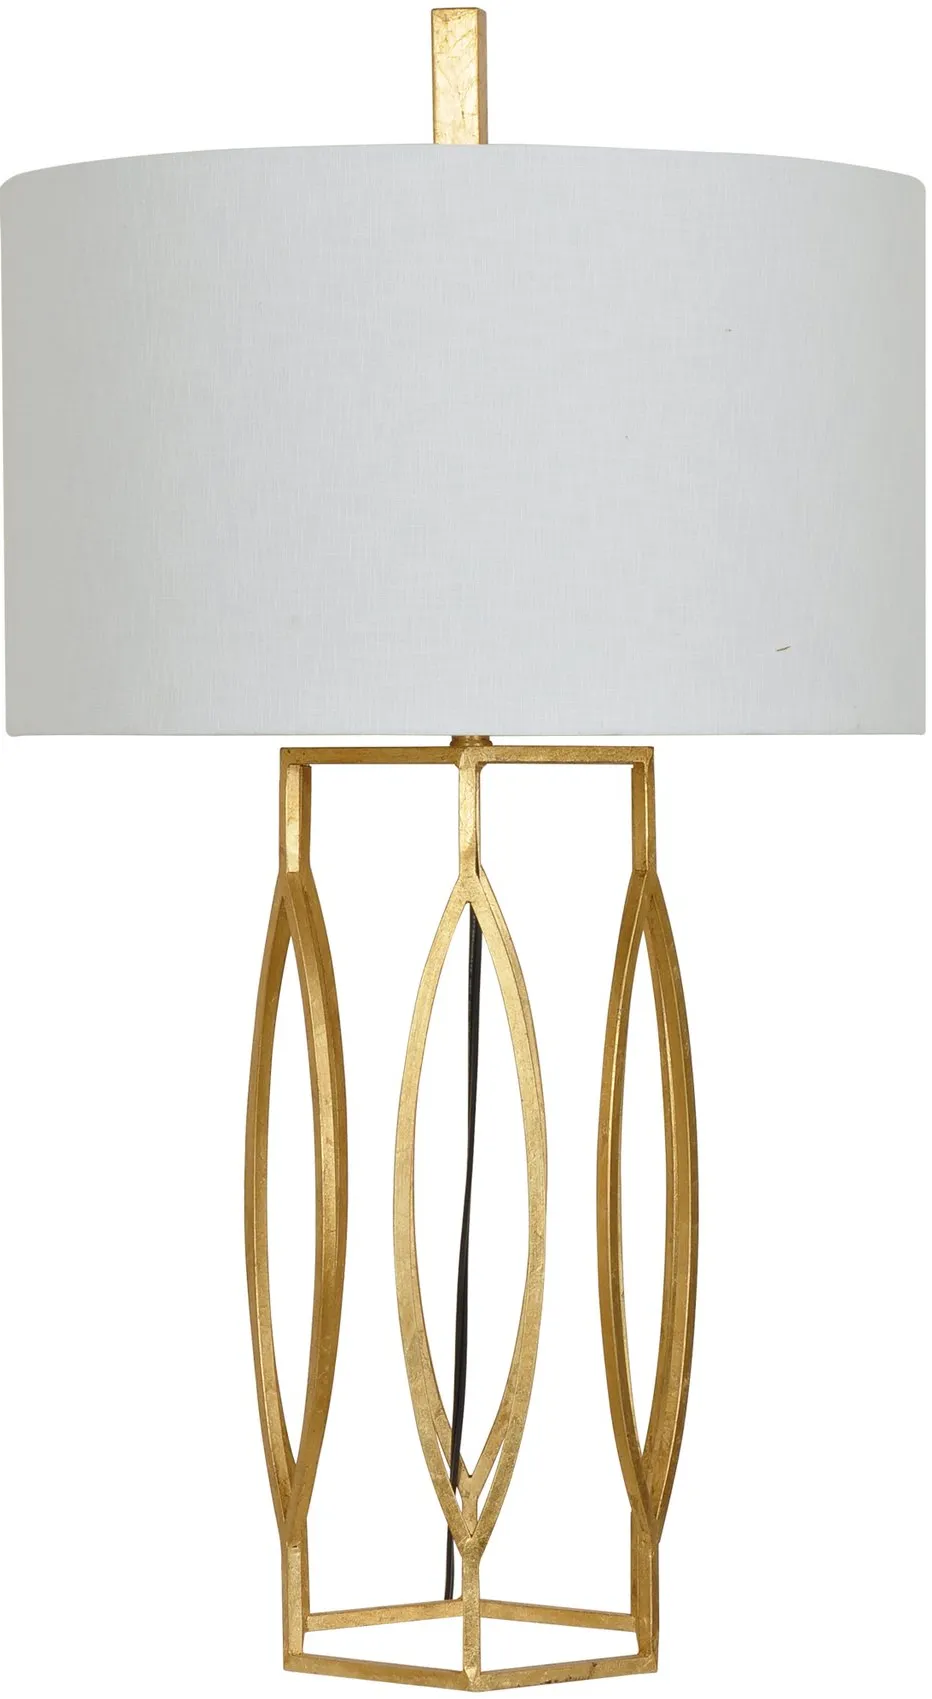 Crestview Collection Global Gold Leaf Table Lamp